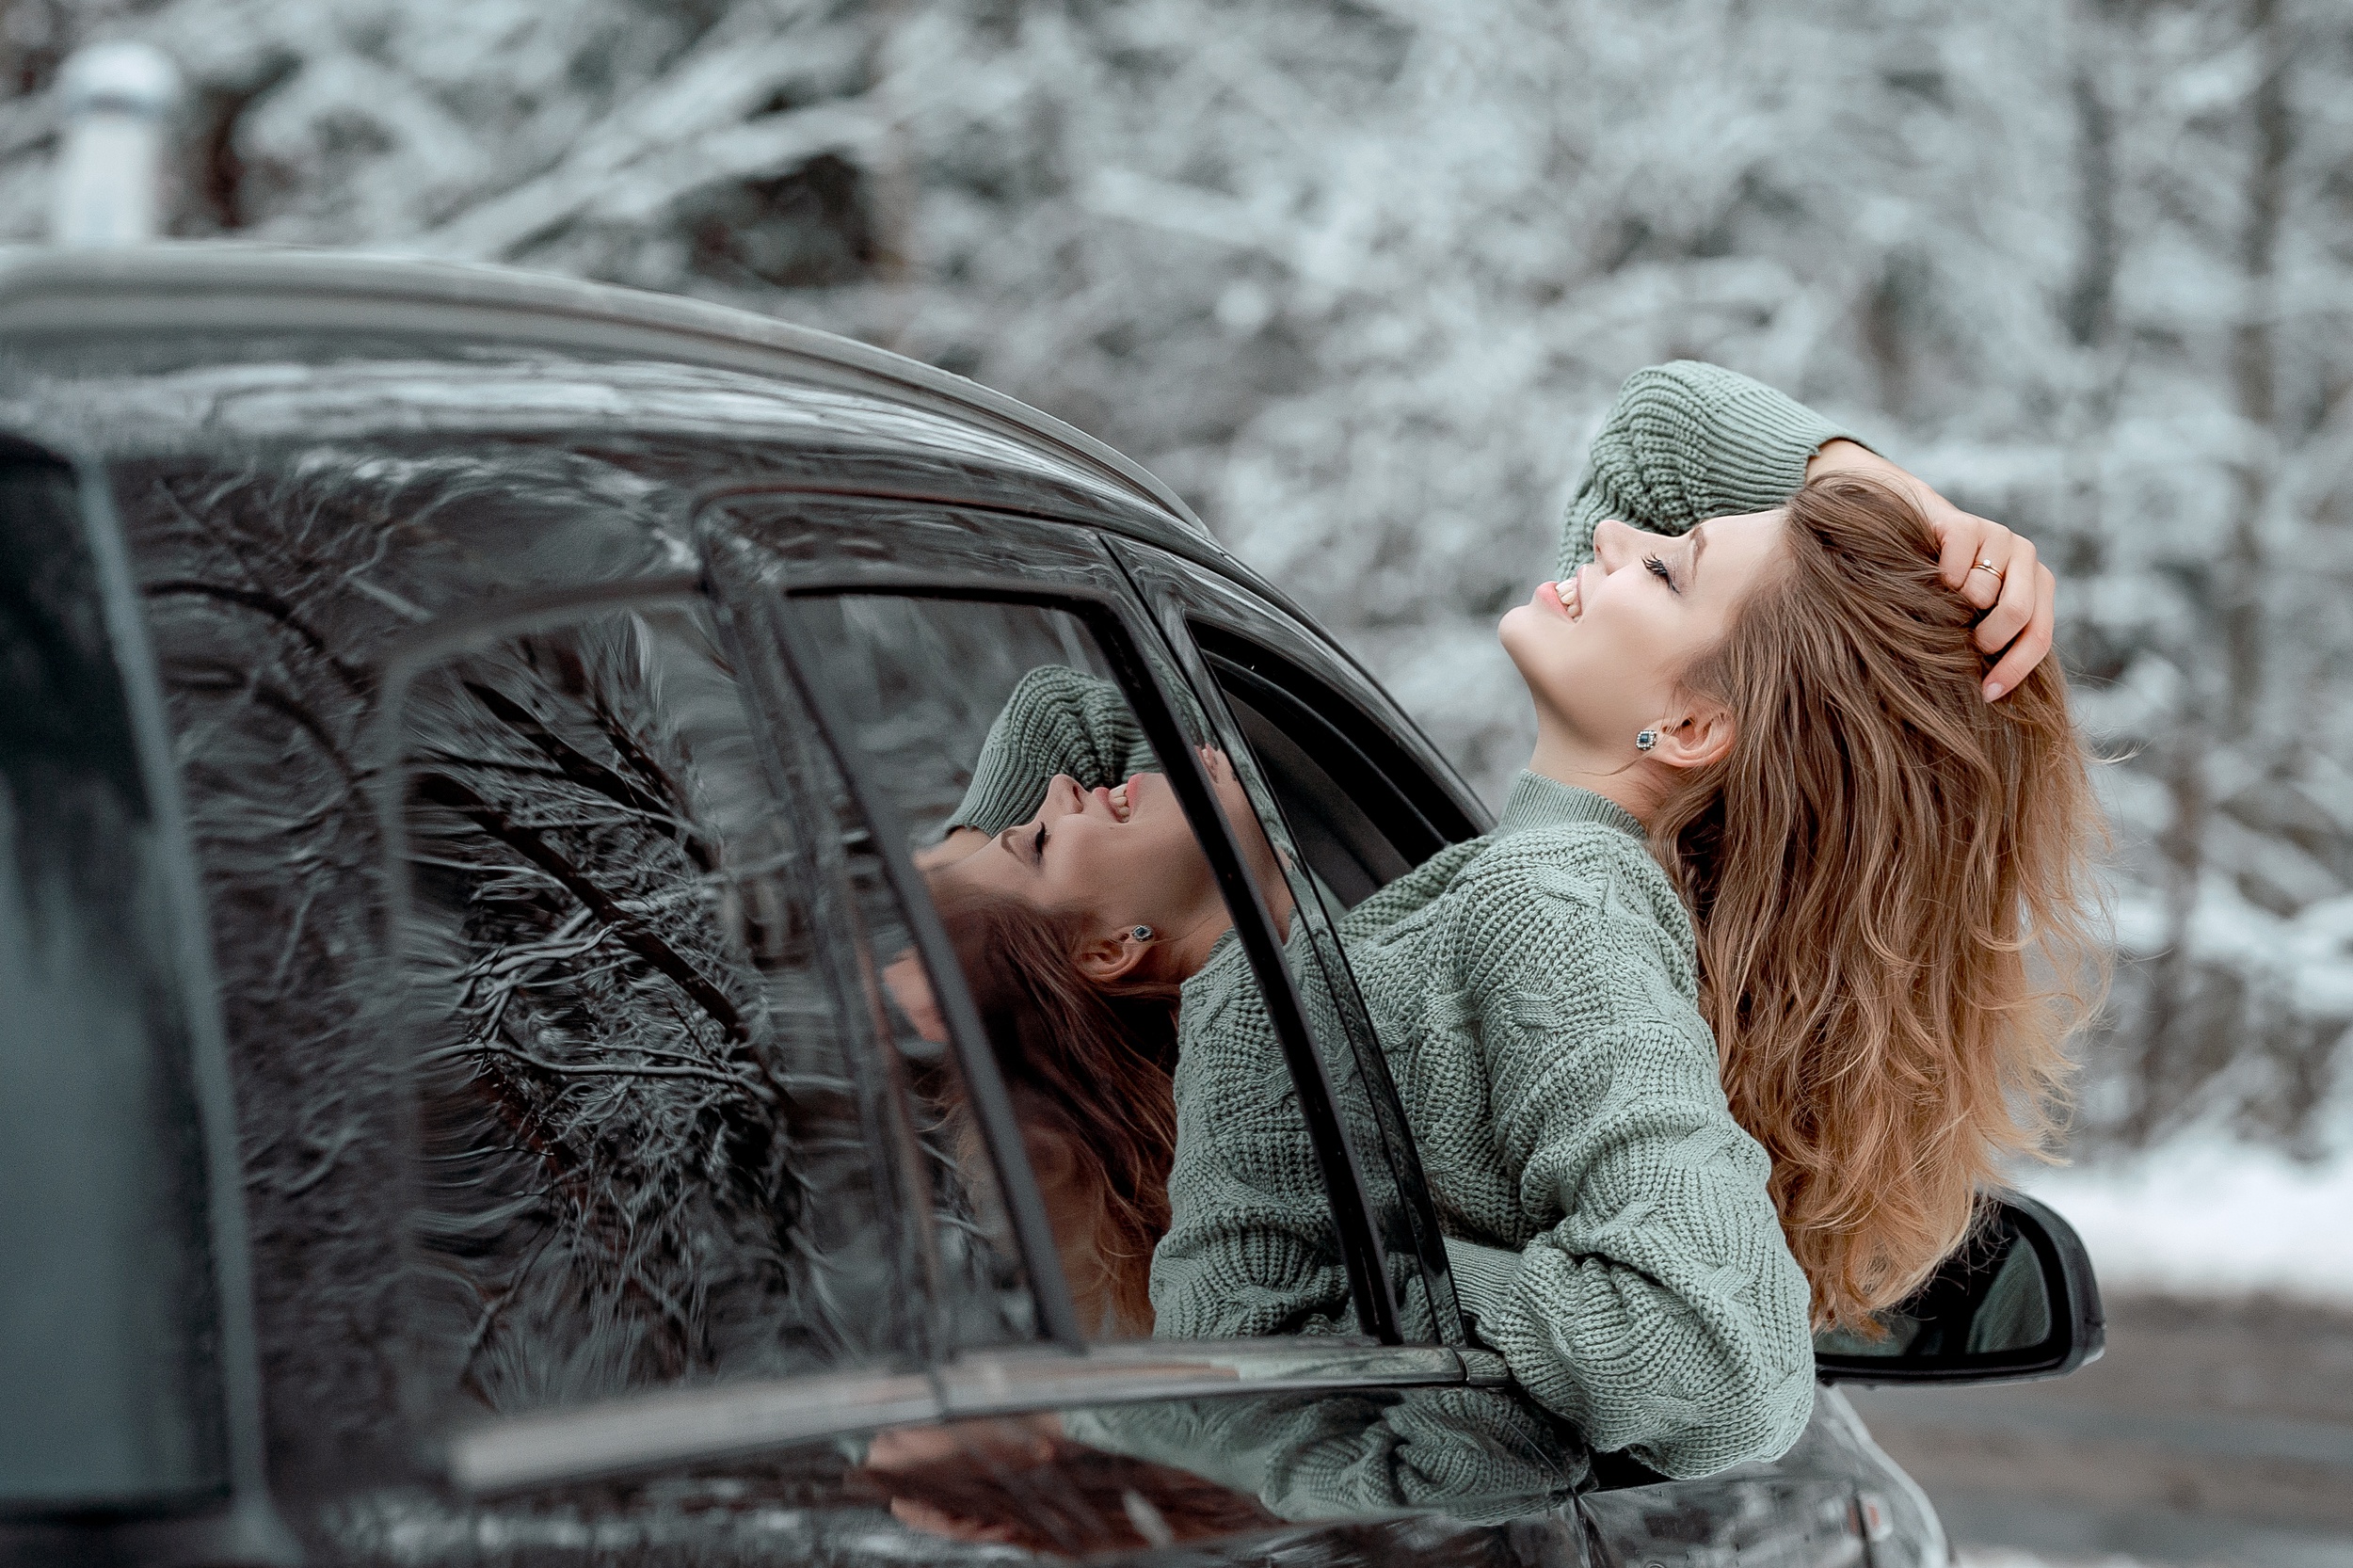 Women Car Women With Cars Vehicle Closed Eyes Reflection Long Hair Smiling Hands In Hair Sweater 2500x1666